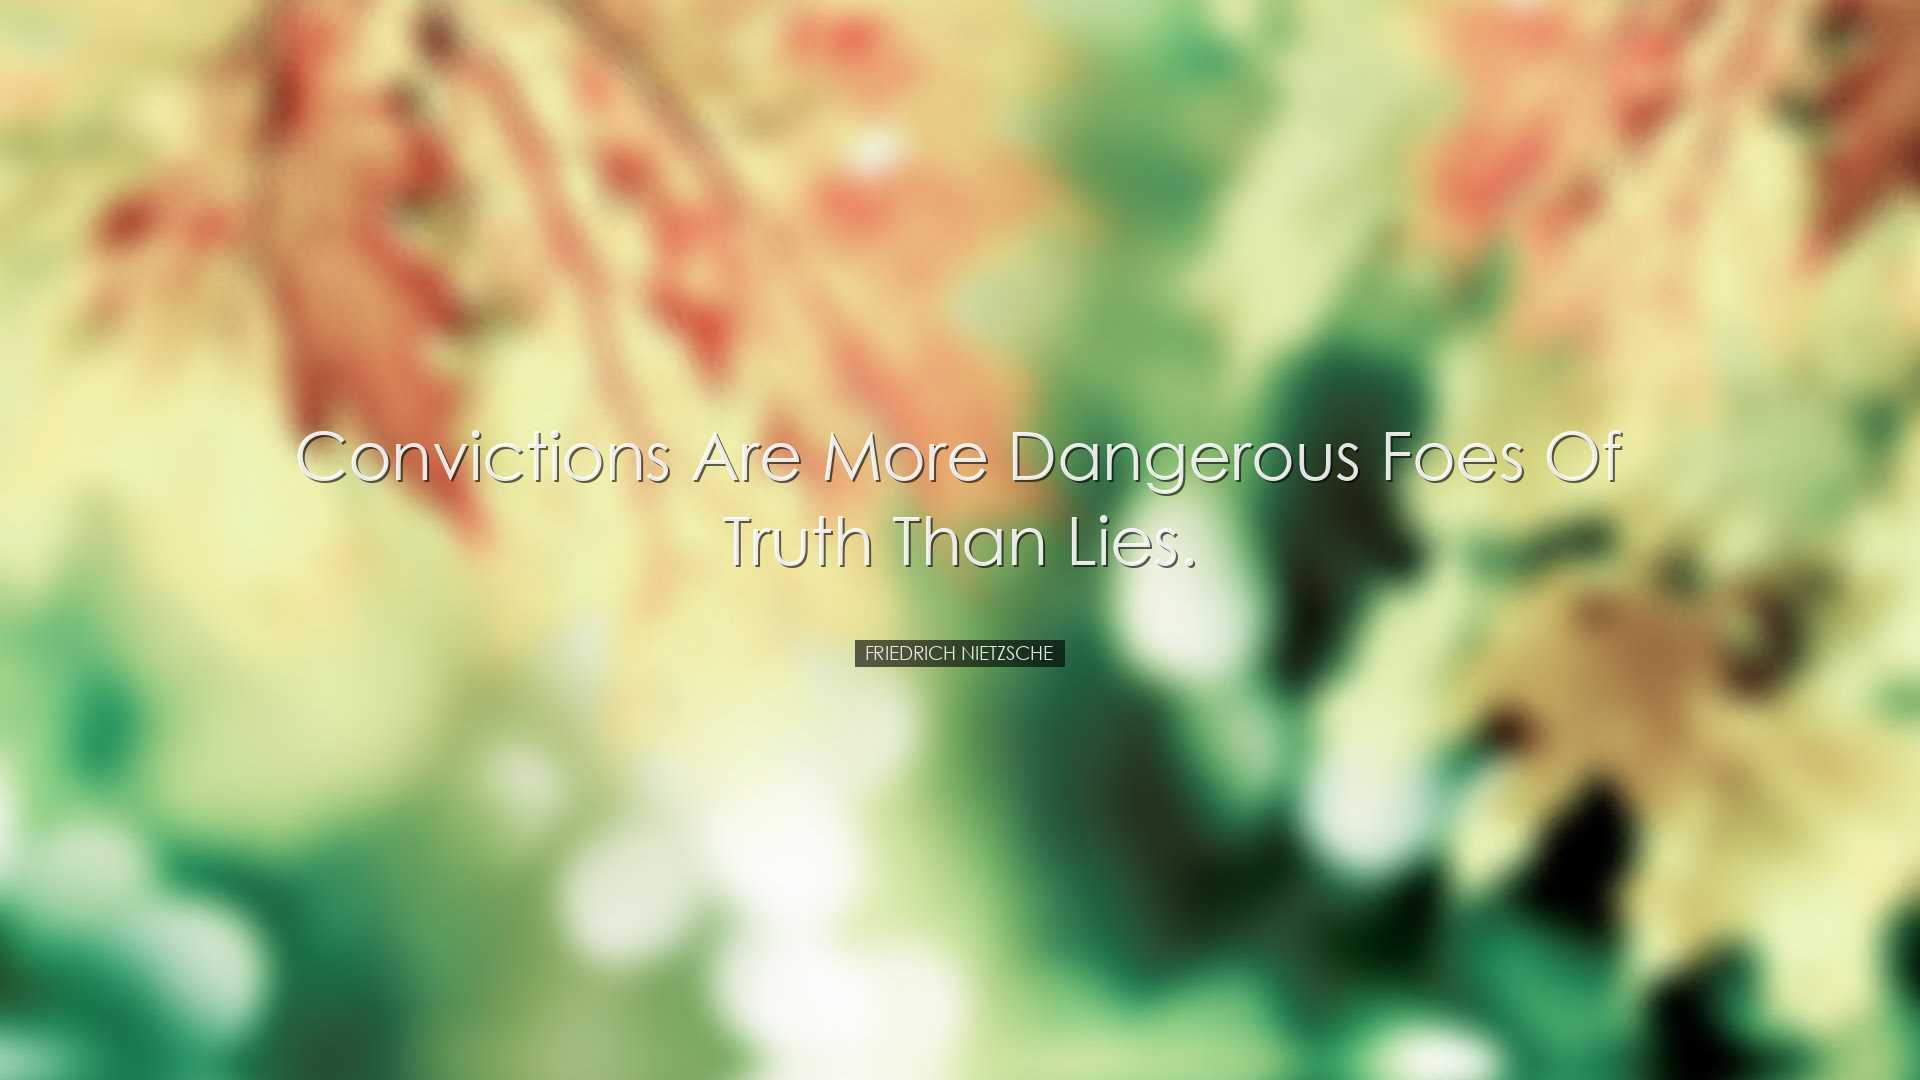 Convictions are more dangerous foes of truth than lies. - Friedric